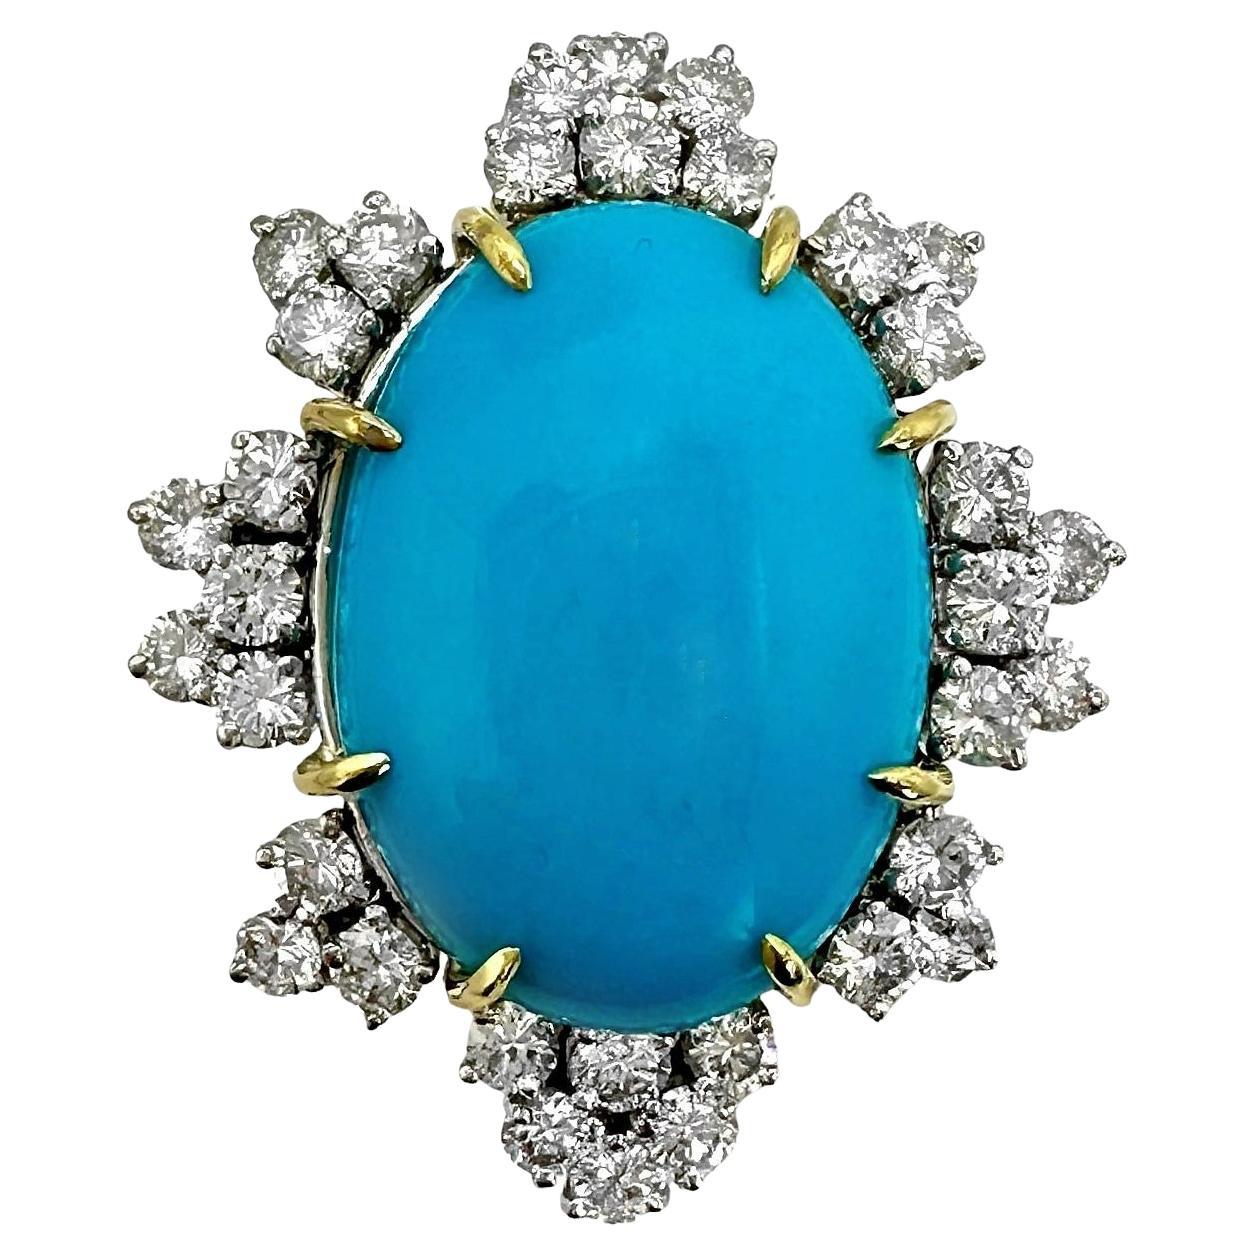 Magnificent Mid-20th Century Turquoise, Diamond and Platinum Cocktail Ring For Sale